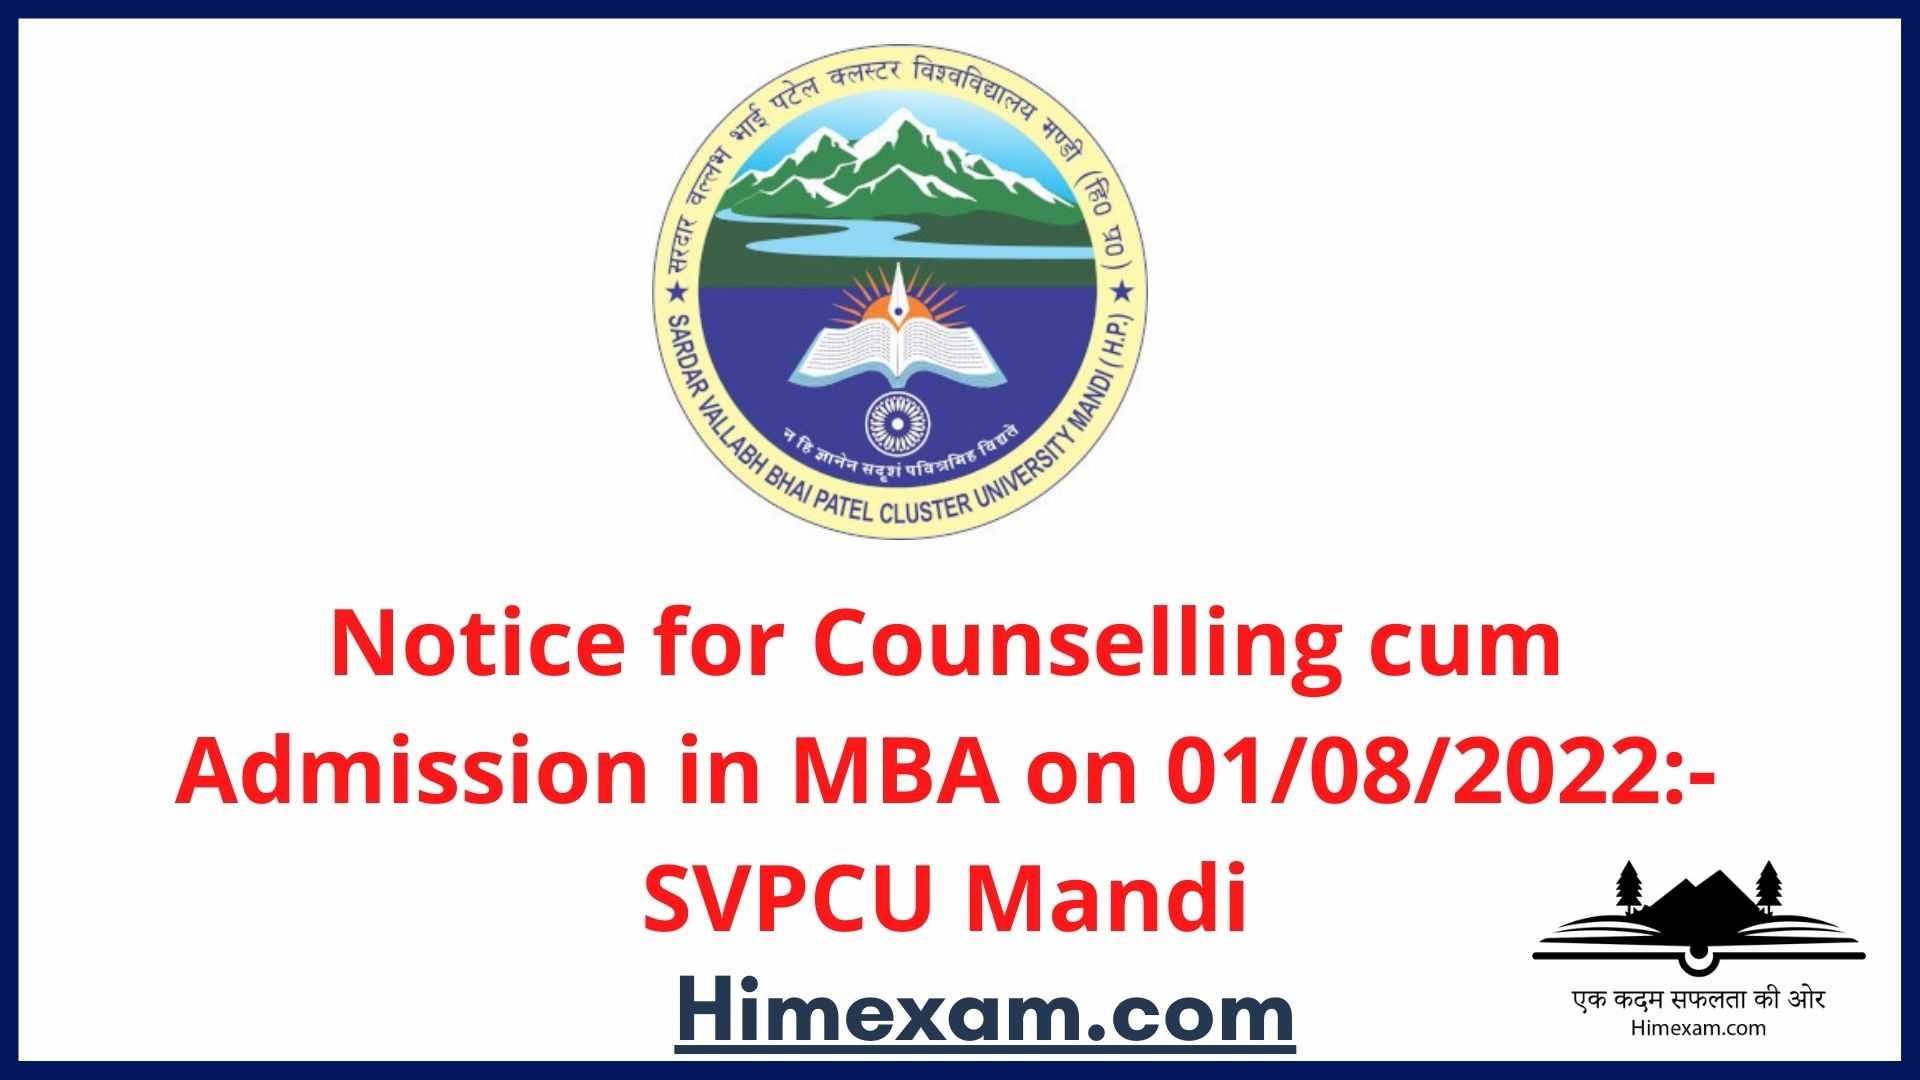 Notice for Counselling cum Admission in MBA on 01/08/2022:- SVPCU Mandi